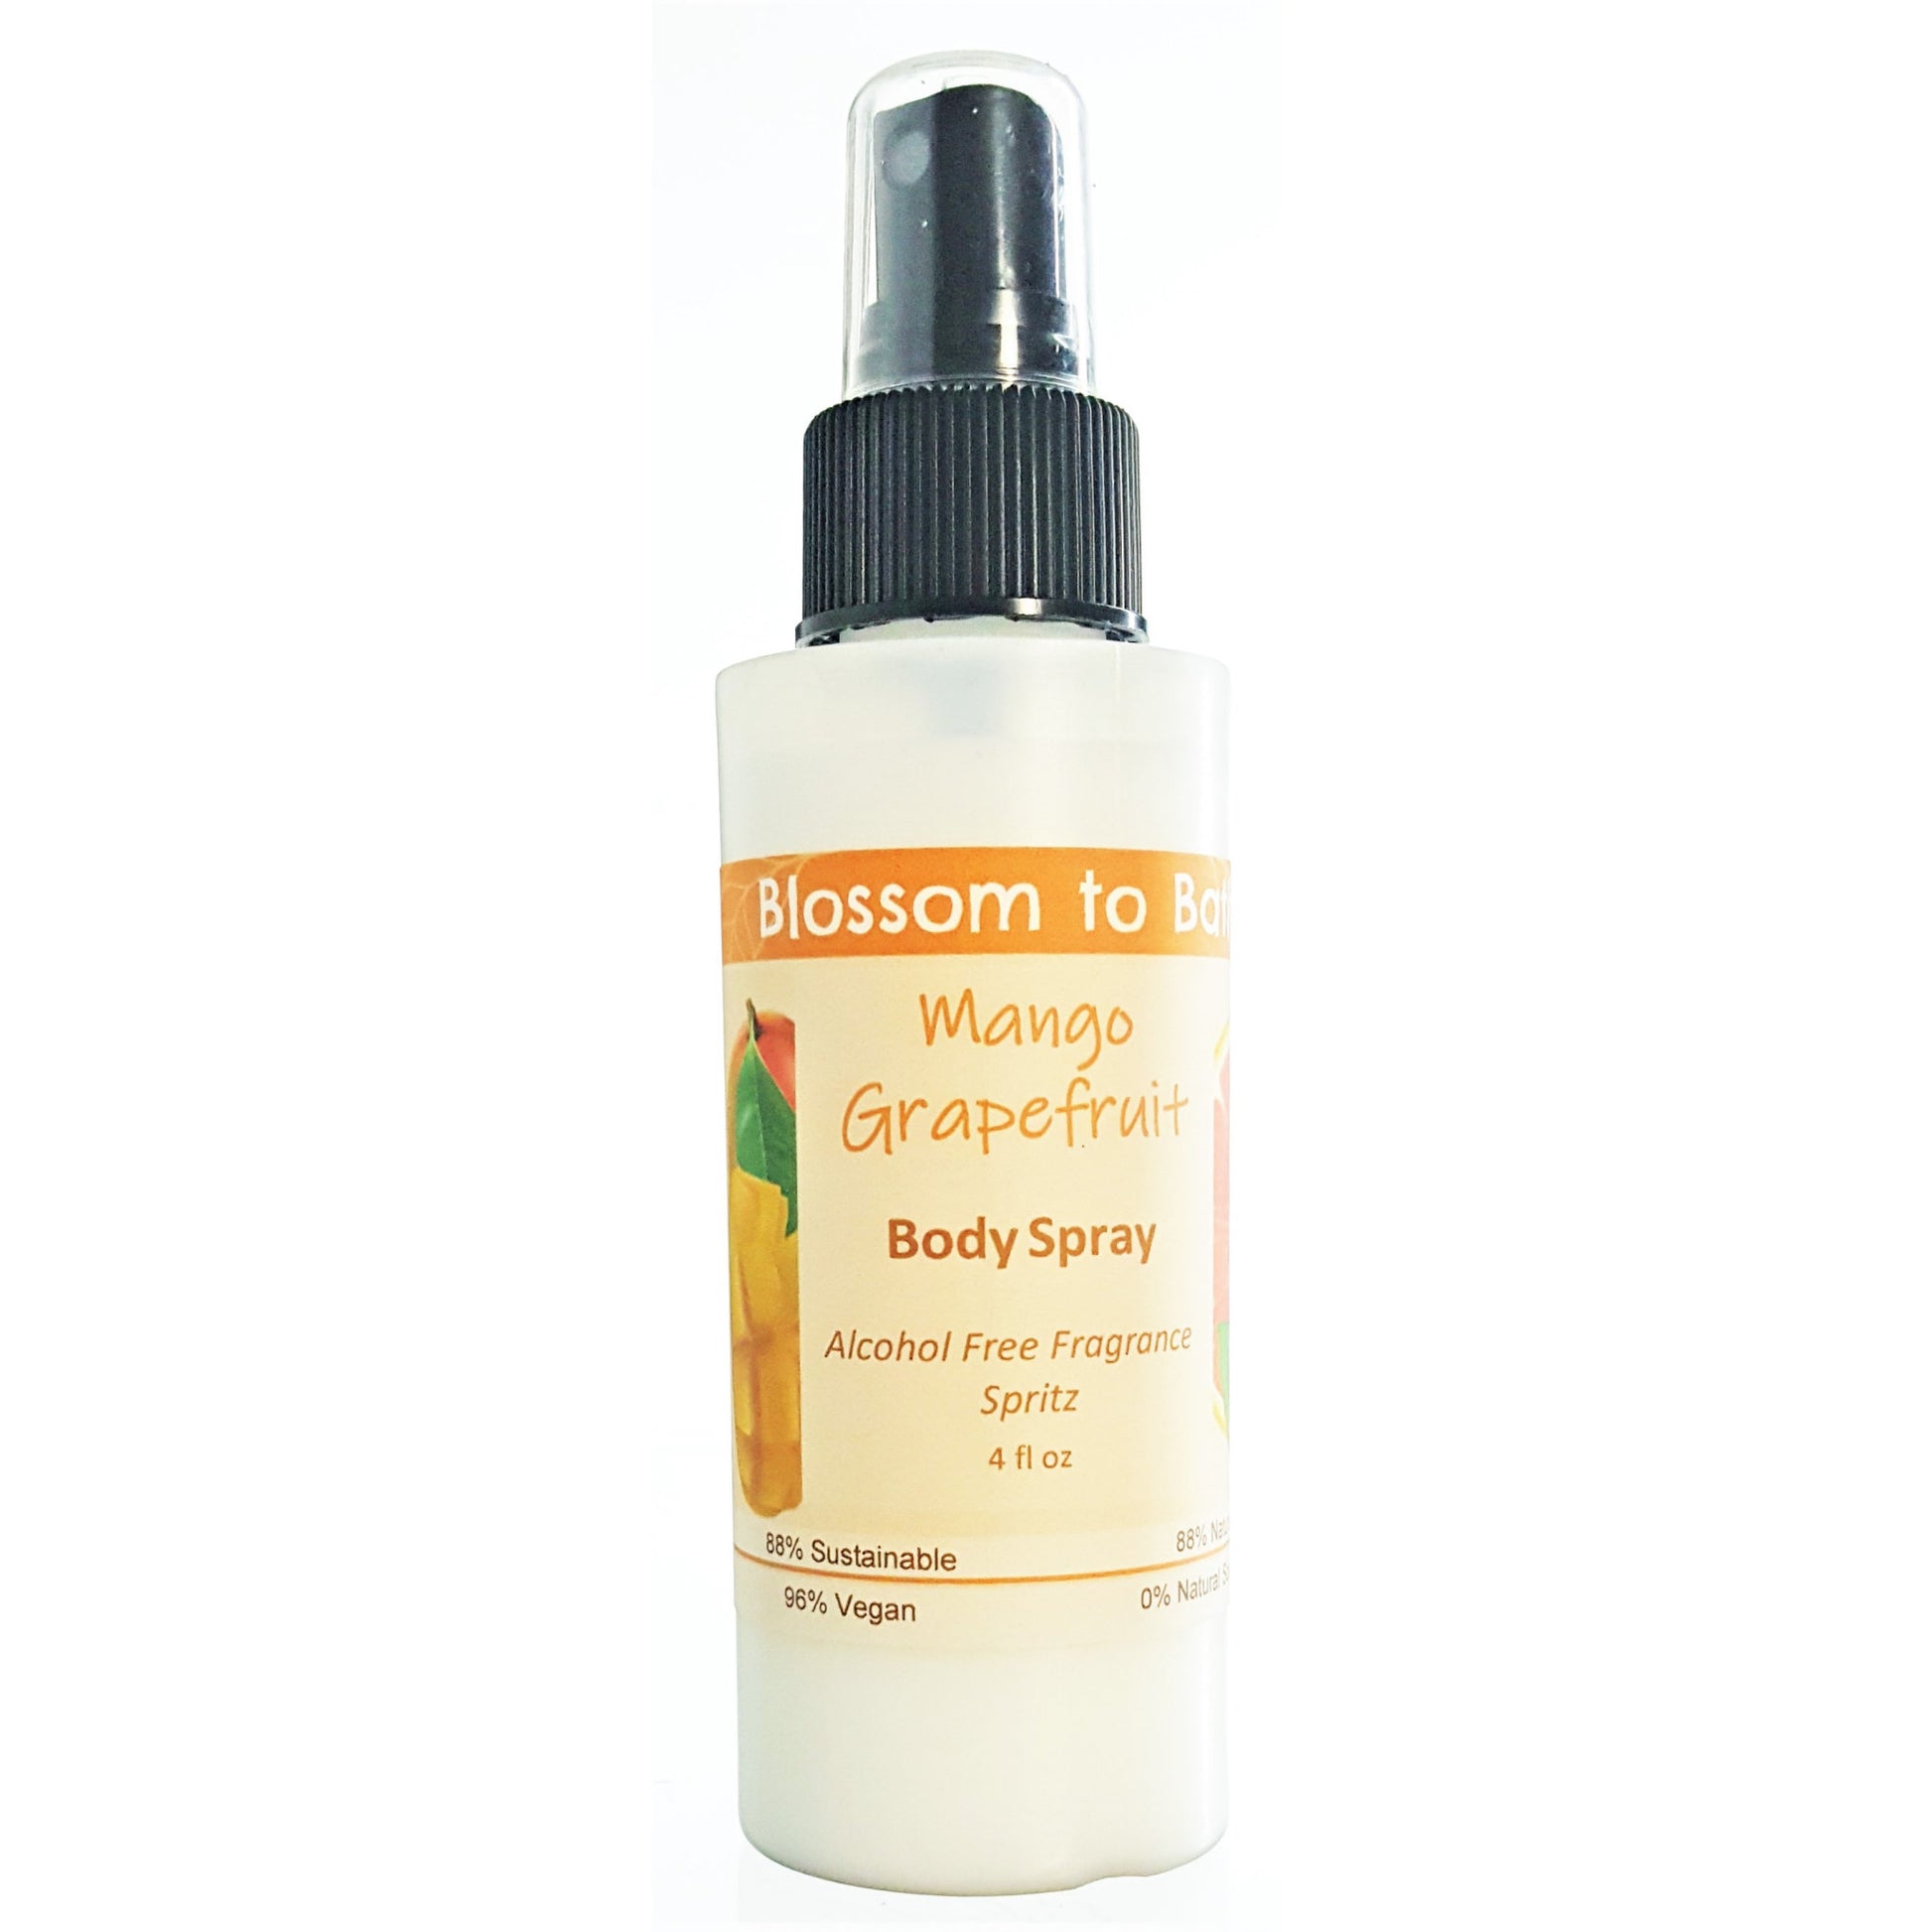 Buy Blossom to Bath Mango Grapefruit Body Spray from Flowersong Soap Studio.  Natural luxury freshening of skin, linens, or air  Exotic tropical fruits in a powdery puff of sophisticated freshness.